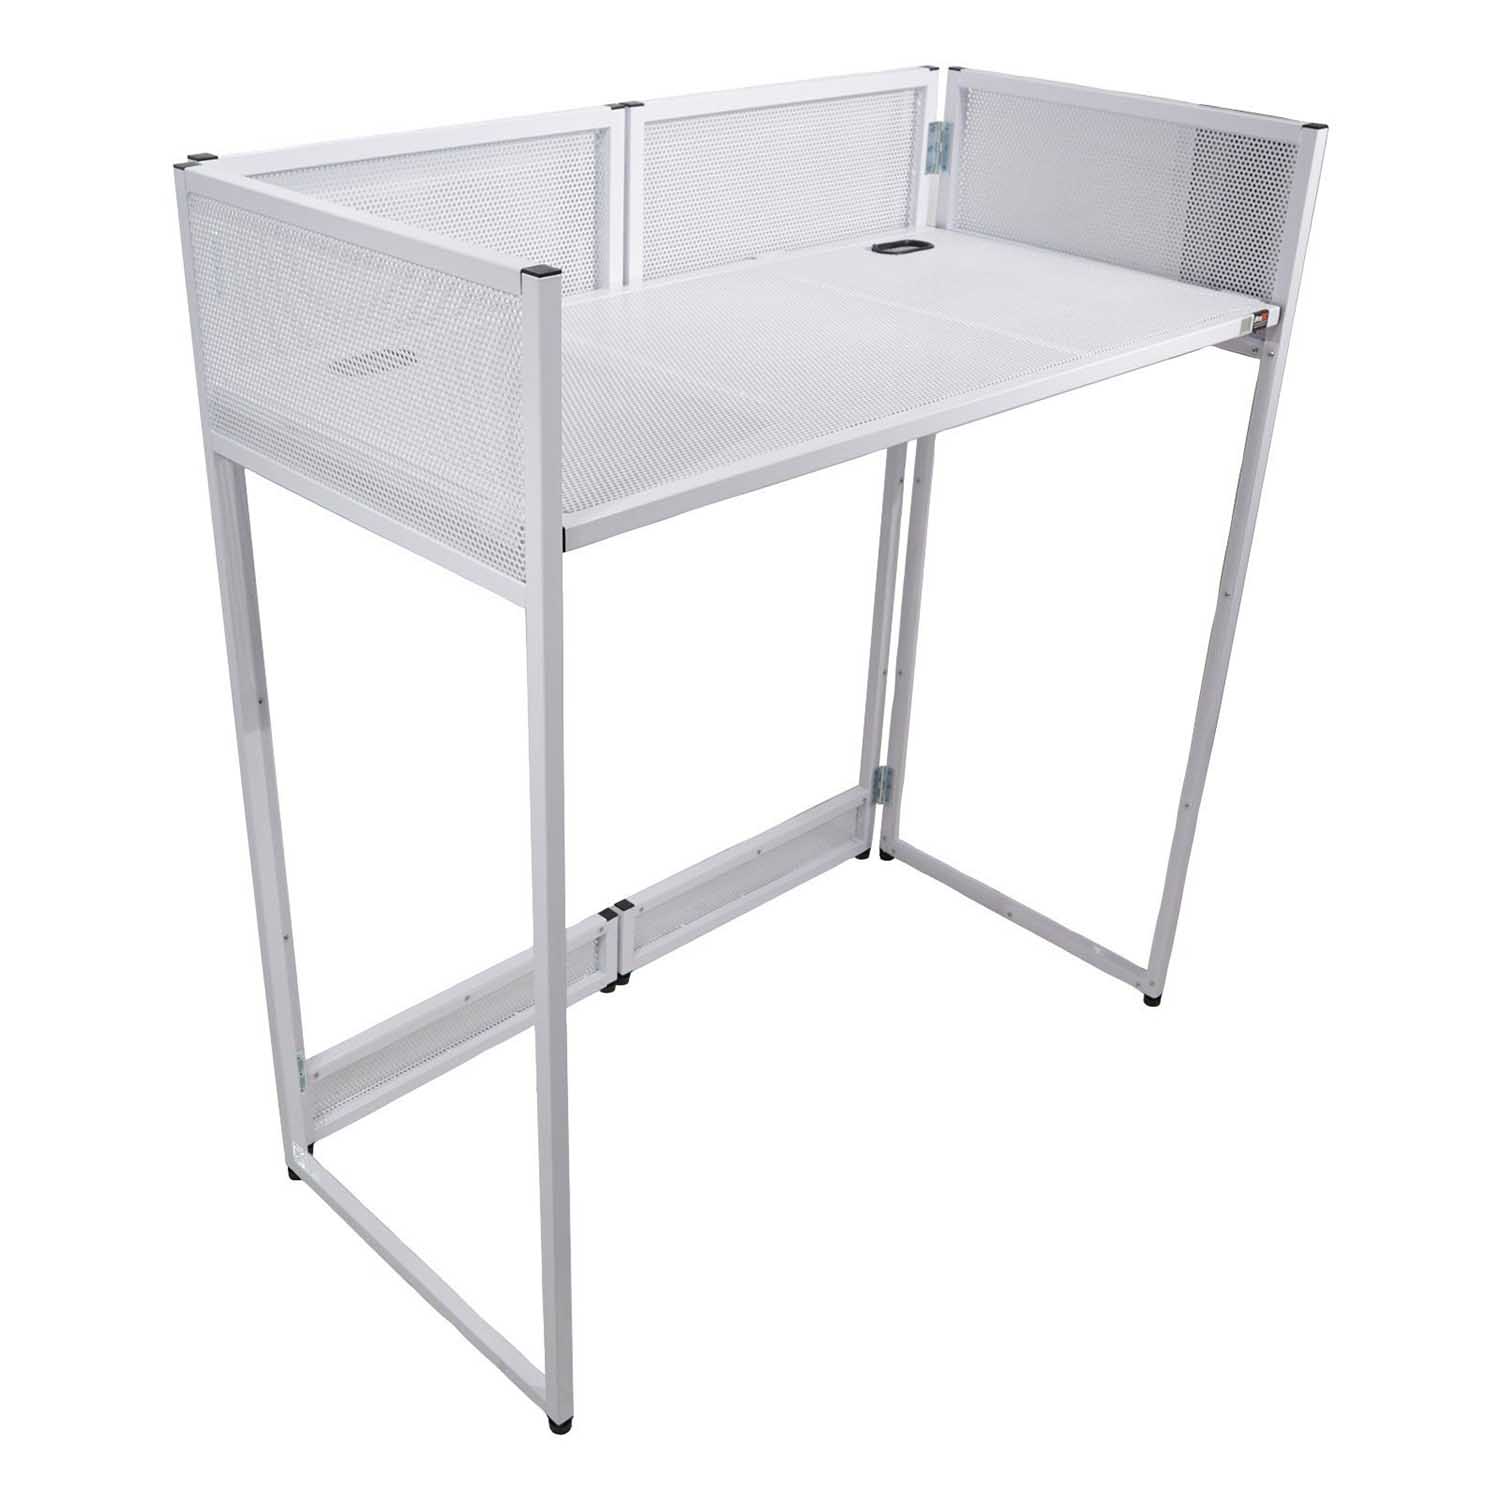 ProX XF-VISTA WH VISTA White DJ Booth Facade Table Station with White/Black Scrim Kit and Padded Travel Bag - Hollywood DJ